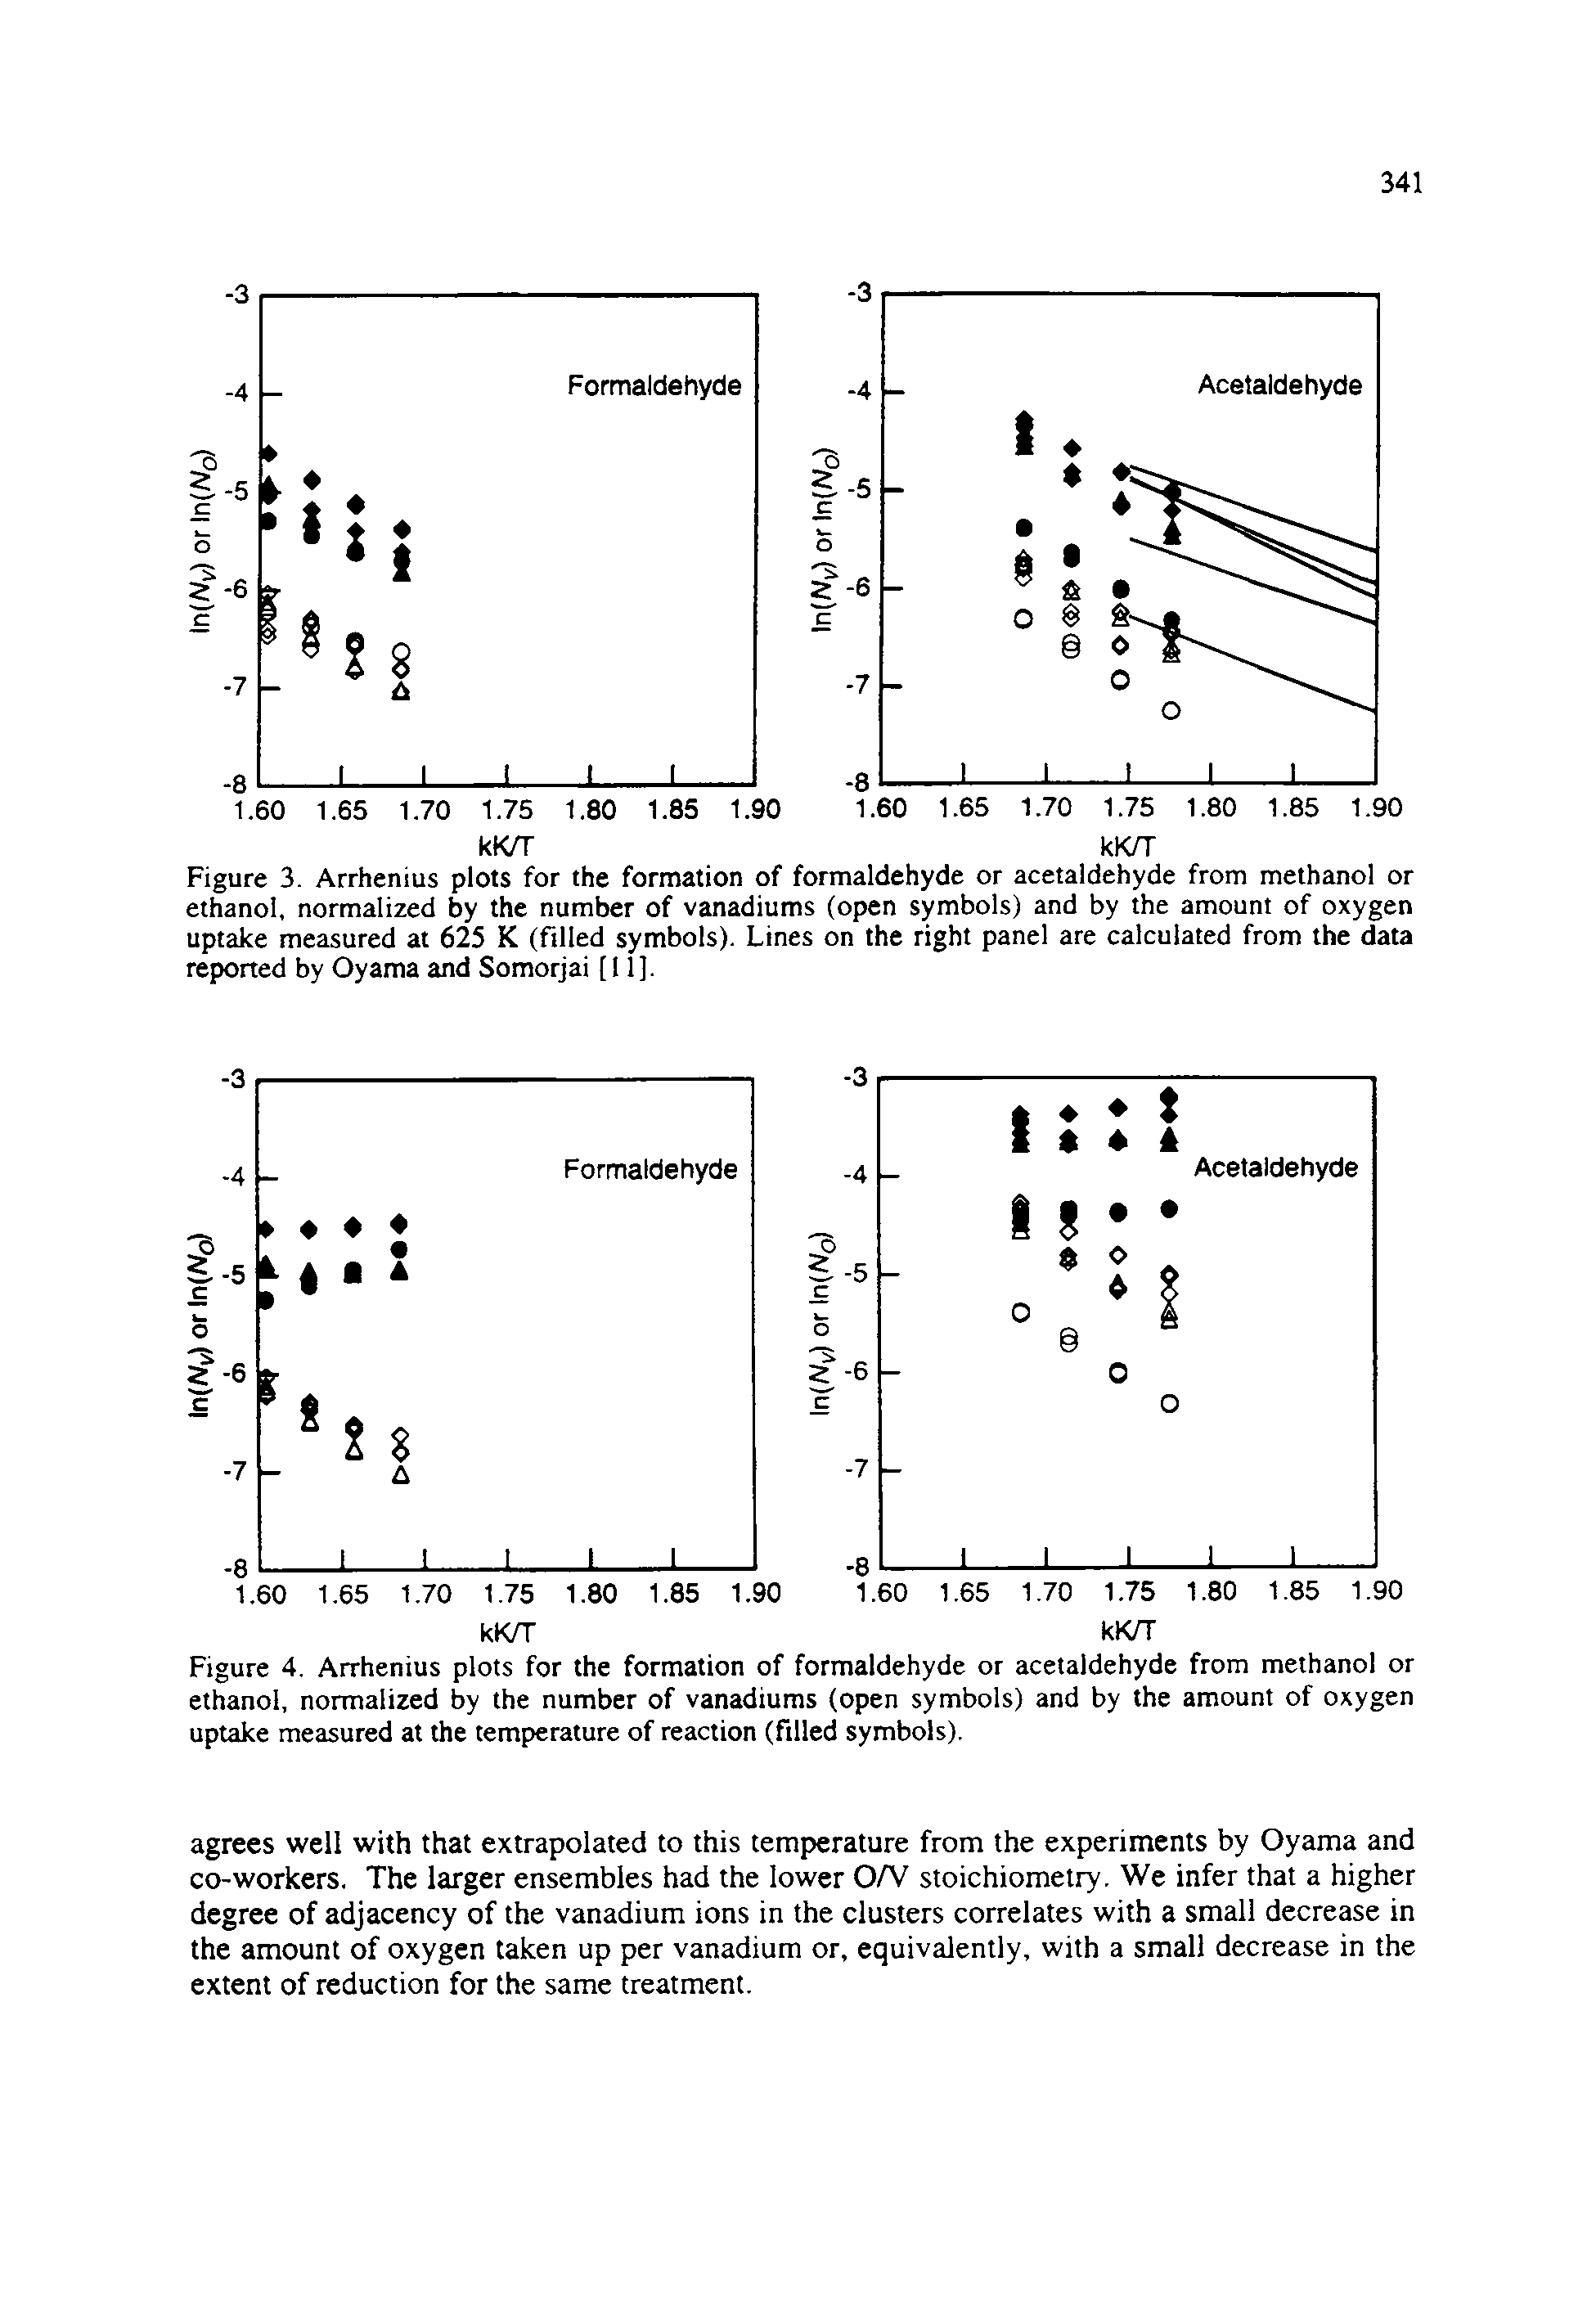 Figure 3. Arrhenius plots for the formation of formaldehyde or acetaldehyde from methanol or ethanol, normalized by the number of vanadiums (open symbols) and by the amount of oxygen uptake measured at 625 K (filled symbols). Lines on the right panel are calculated from the data reported by Oyama and Somorjai [11].